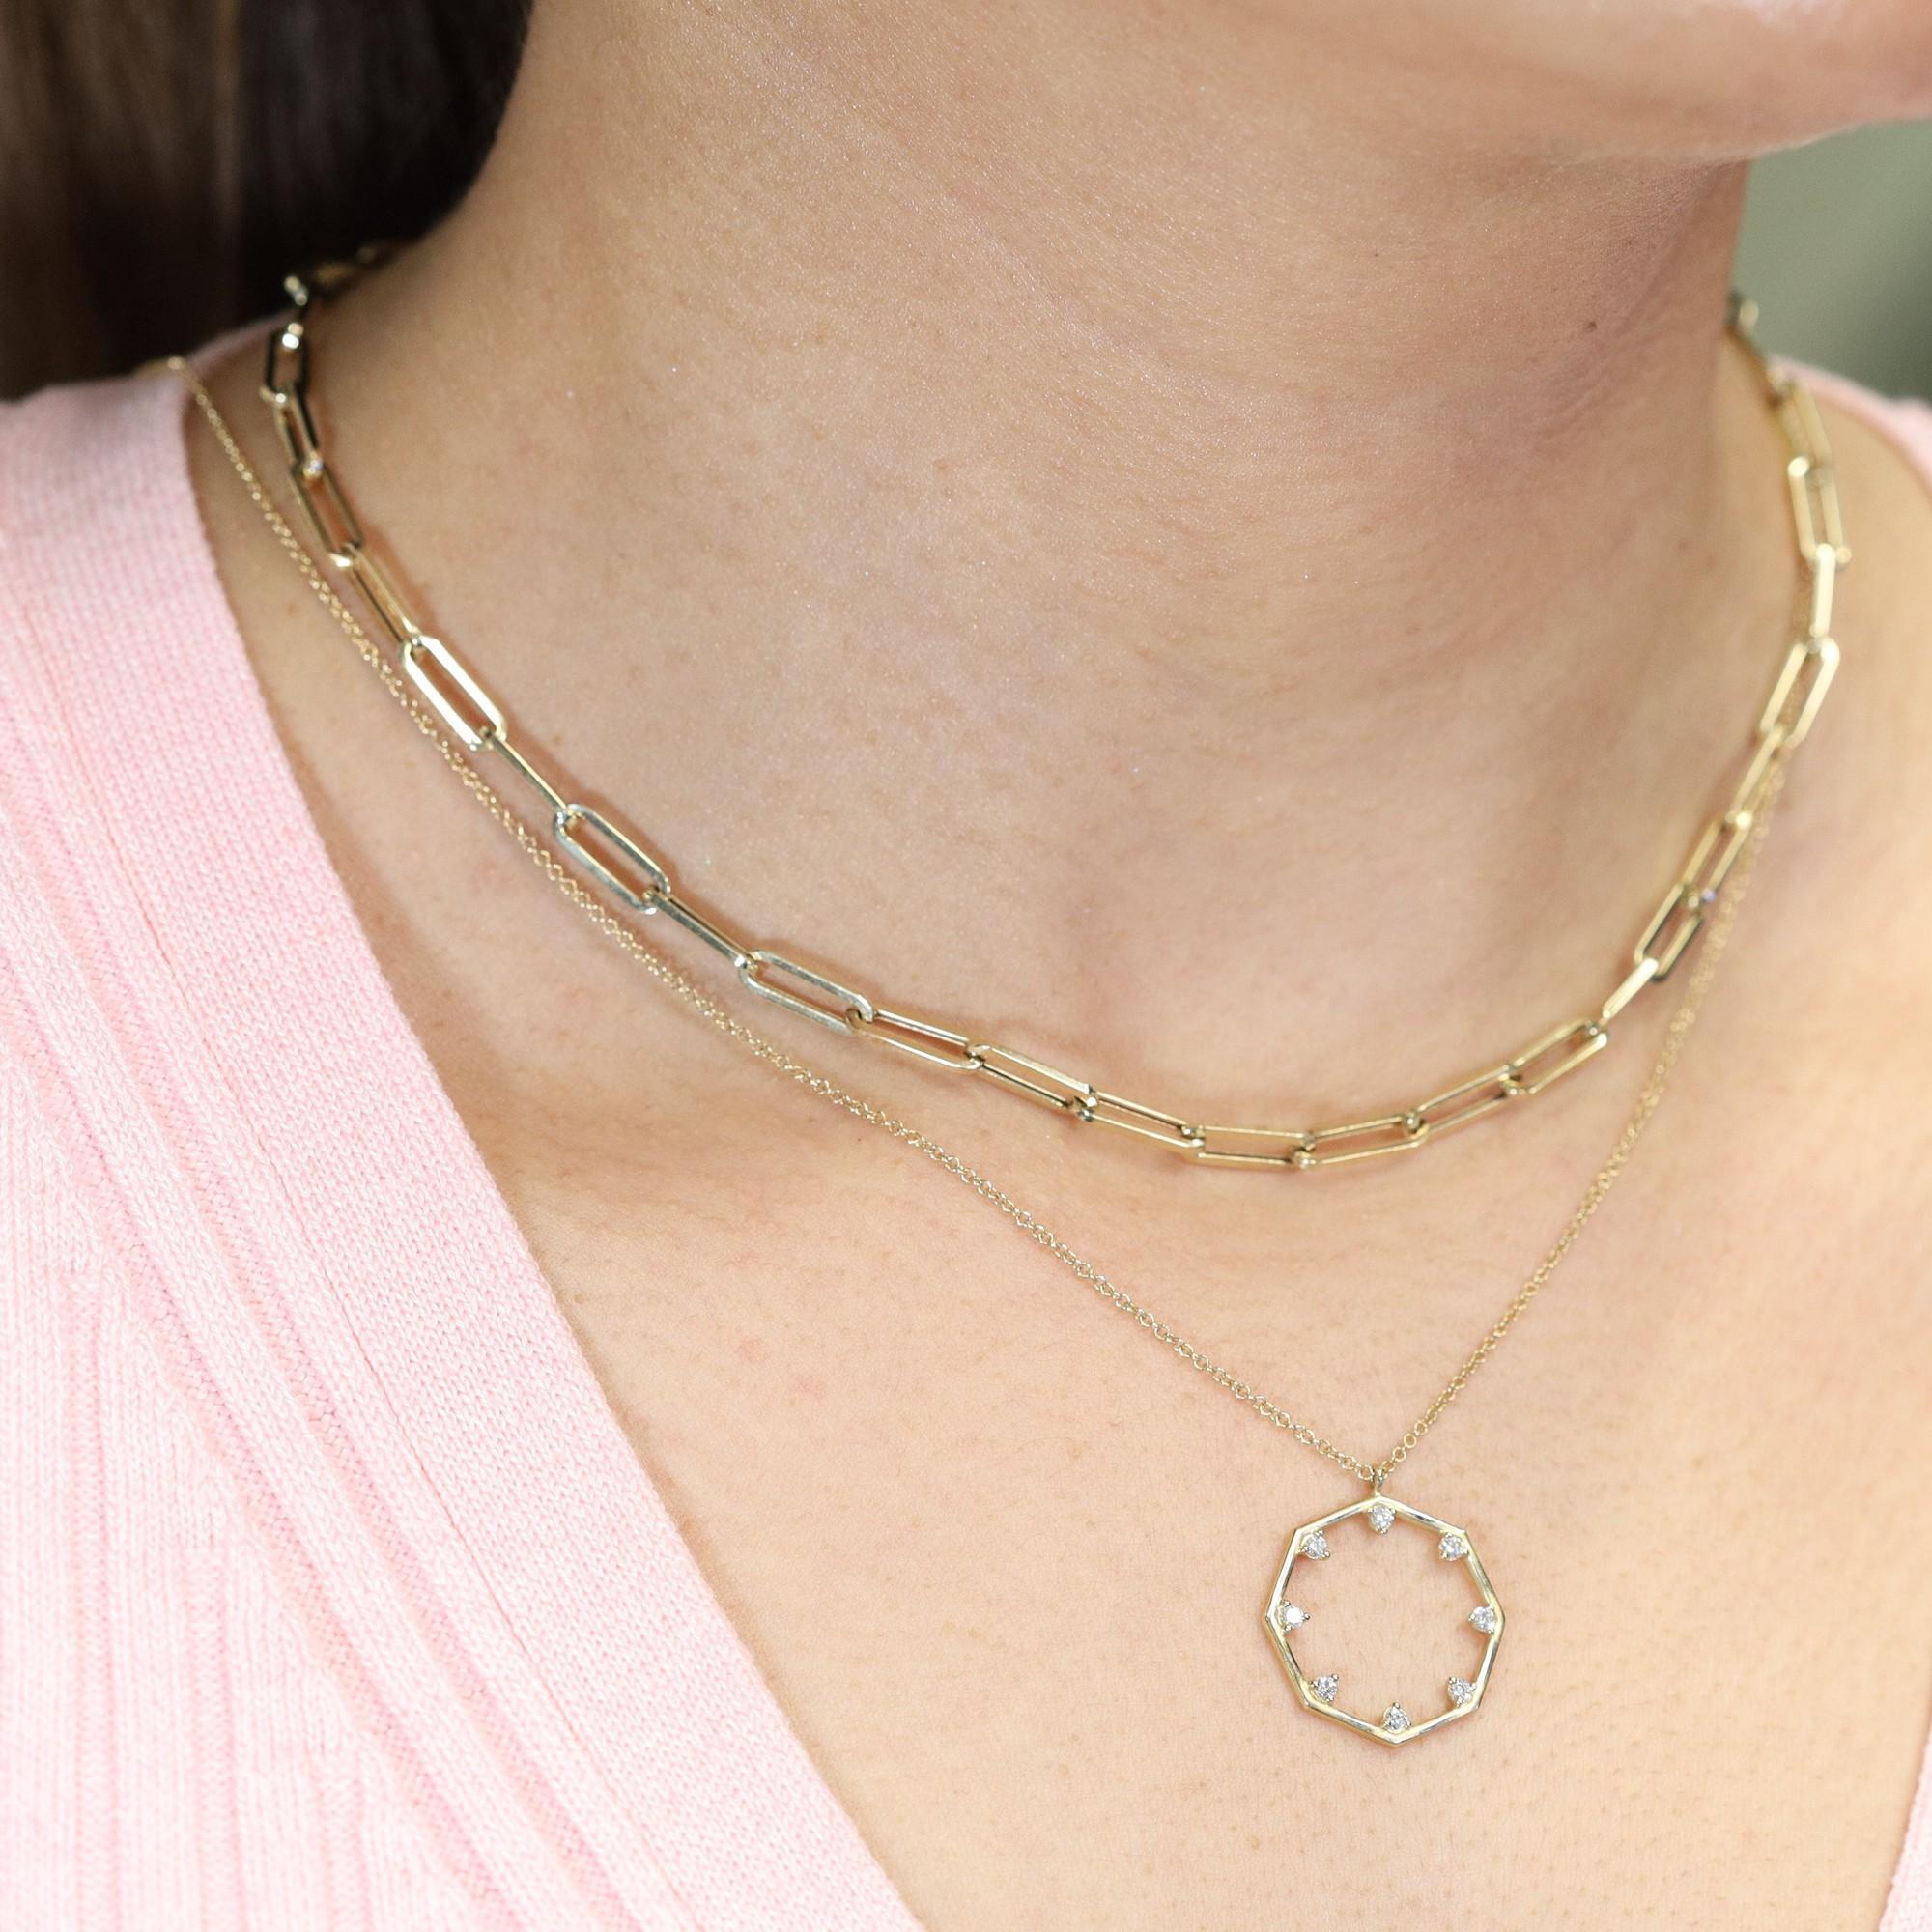 Trendy and lightweight for an everyday look. This paper clip link chain necklace is crafted in 14k yellow gold. Length: 18 inches. Link Size: 11.75mm x 3.75mm. Weight: 6.30 grams. Closure: Lobster lock. Whether you layer up or wear it solo, you are